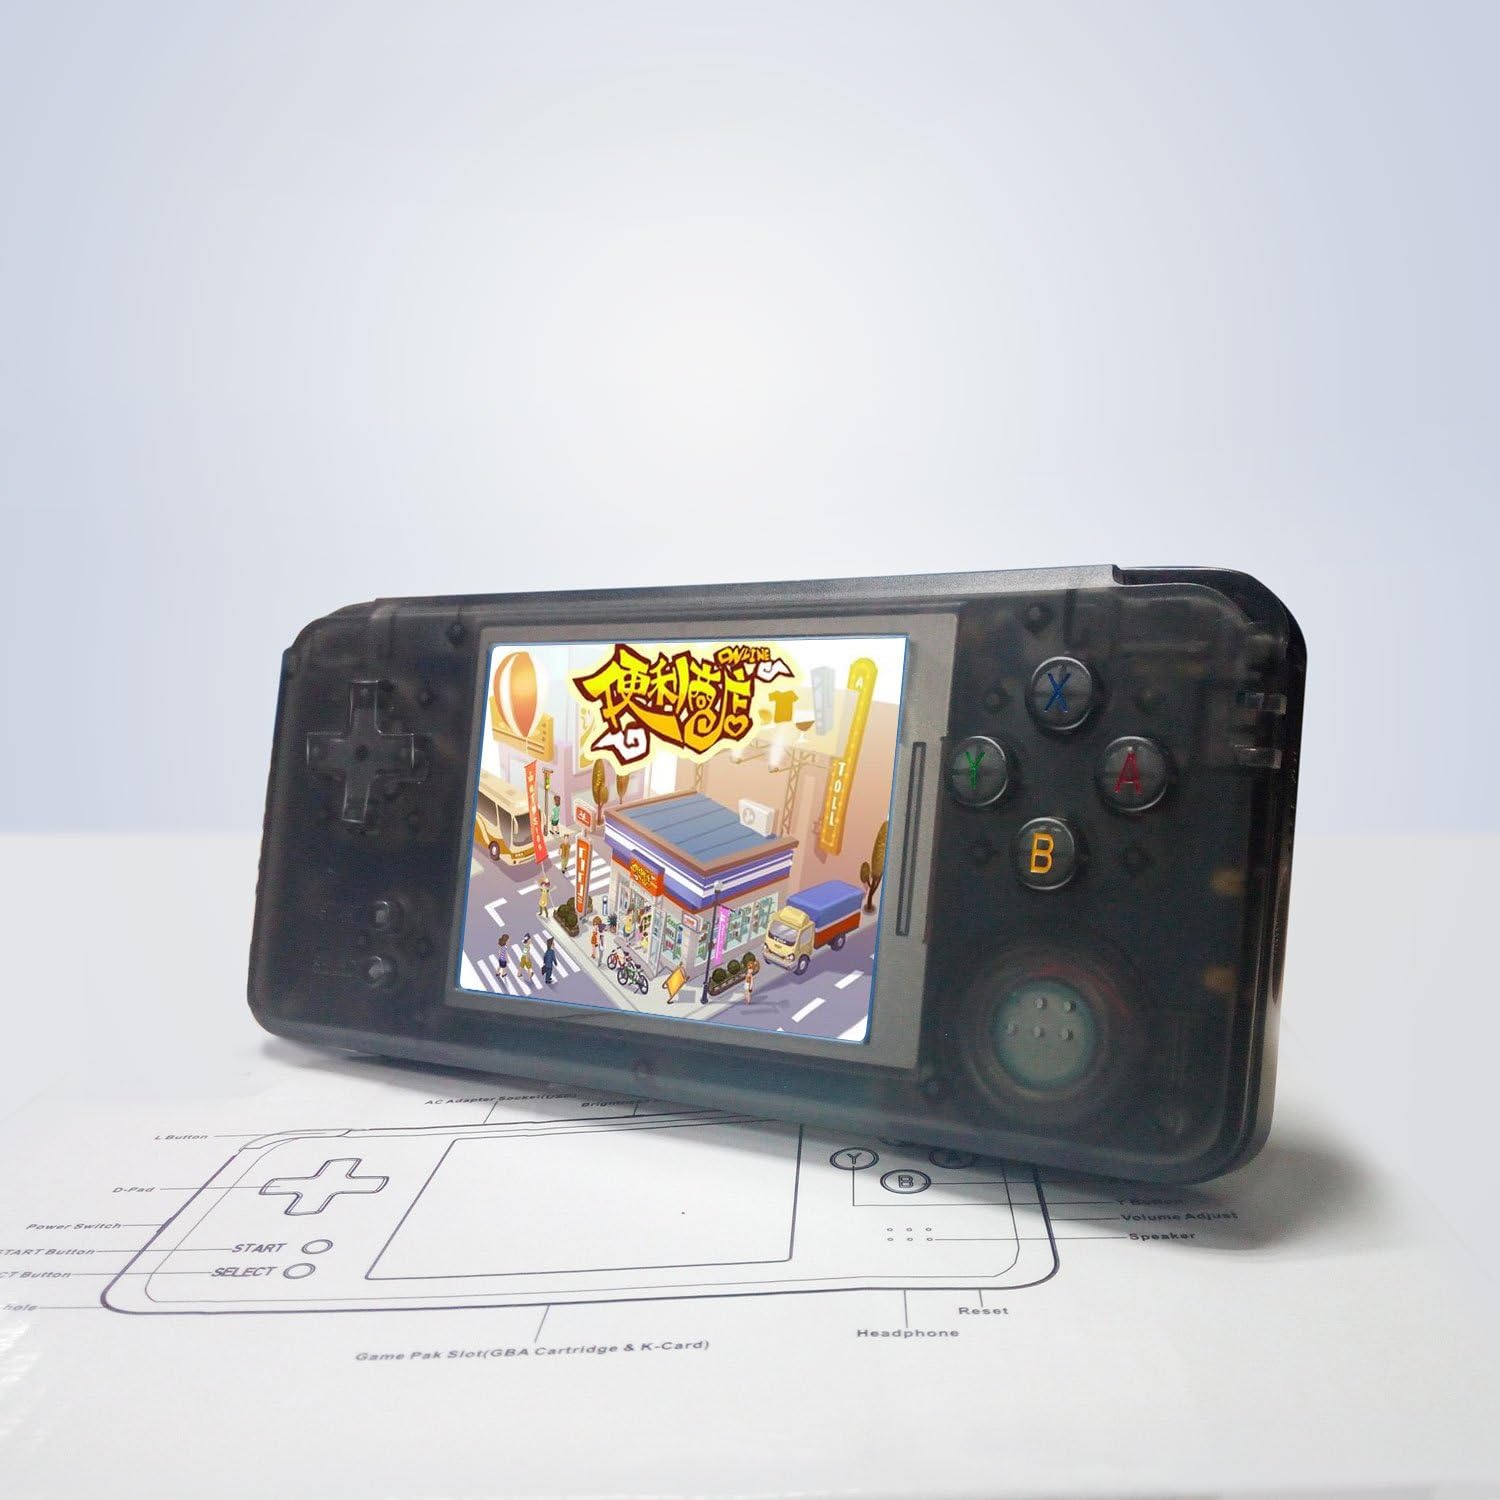 Anbernic Handheld Game Console Review